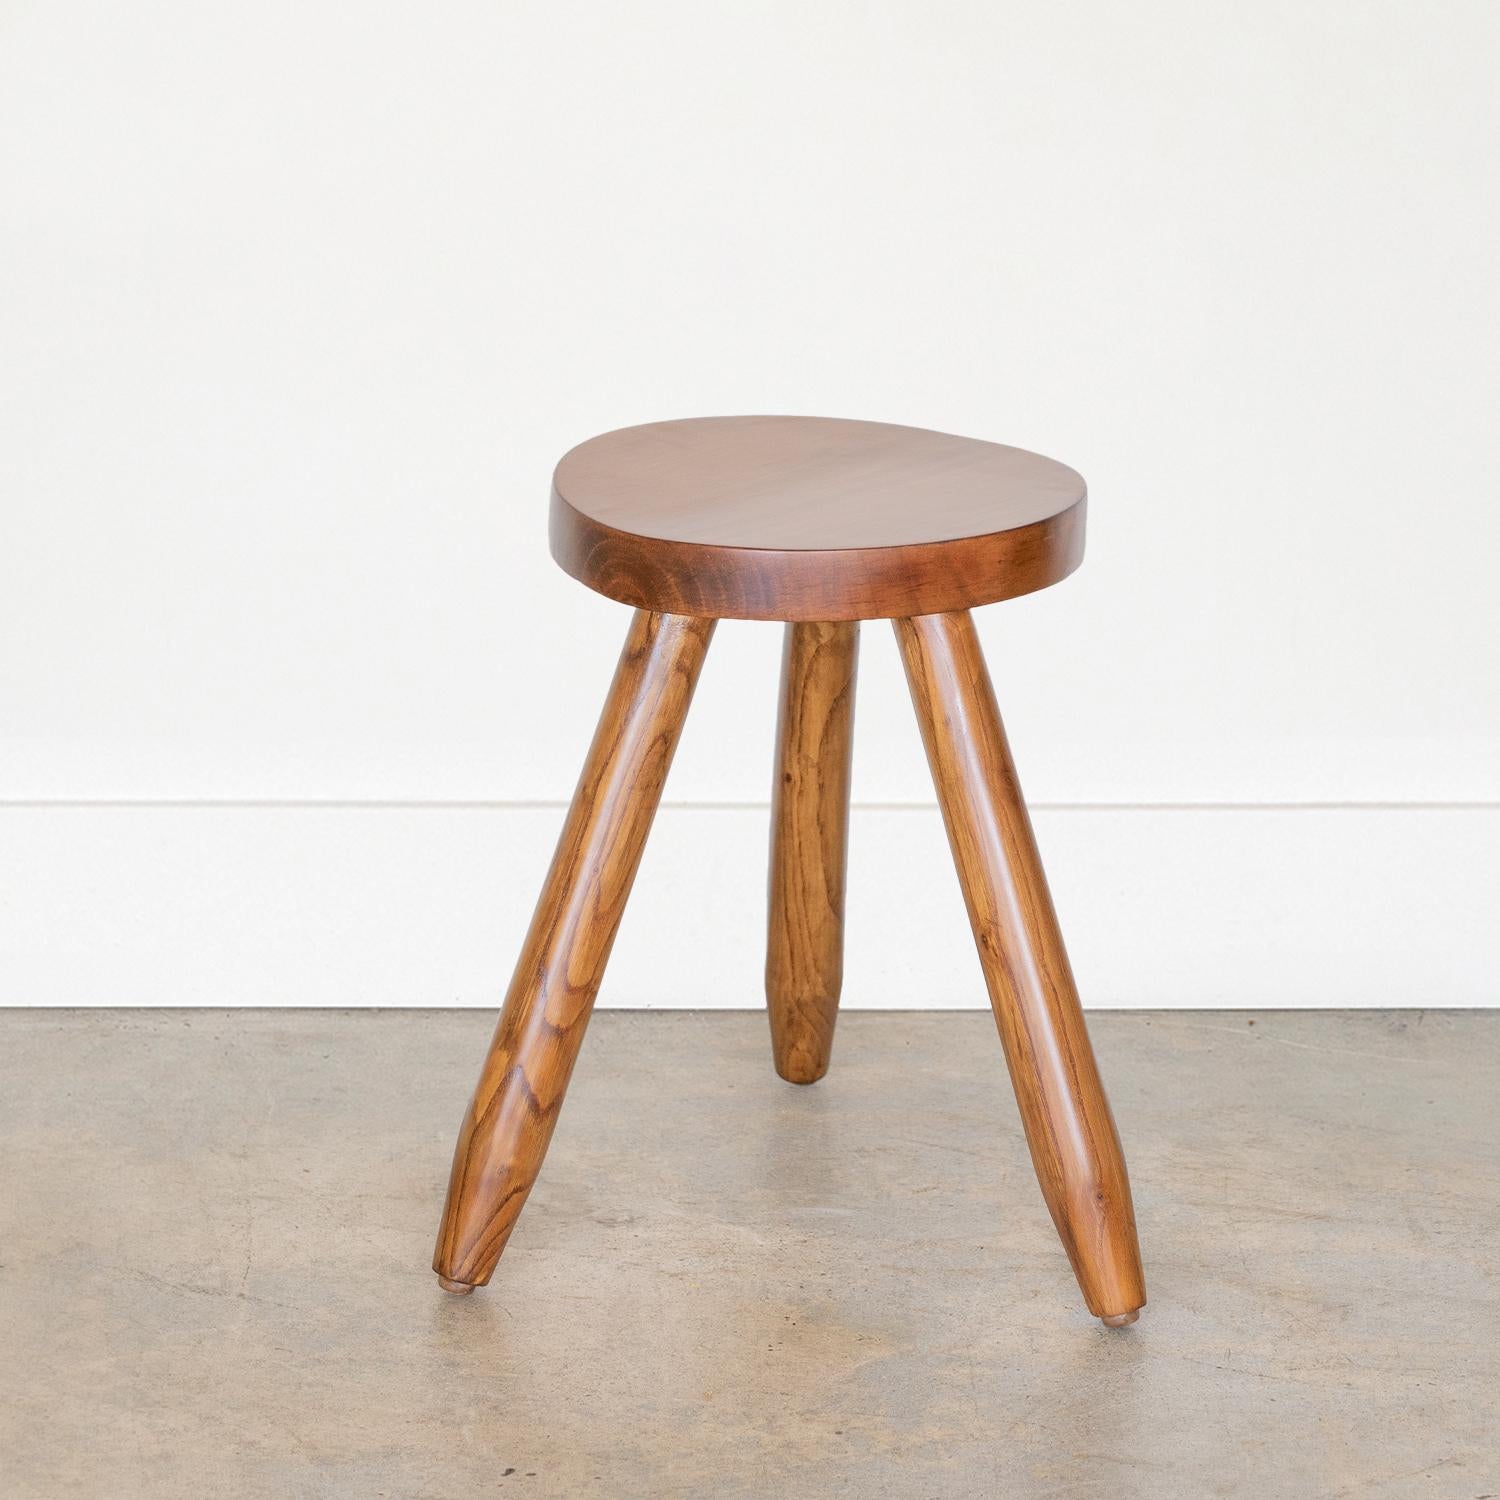 Vintage wood stool with circular top and smooth wood legs from France. Newly refinished. Can be used as stool or as side table next to chairs. 



